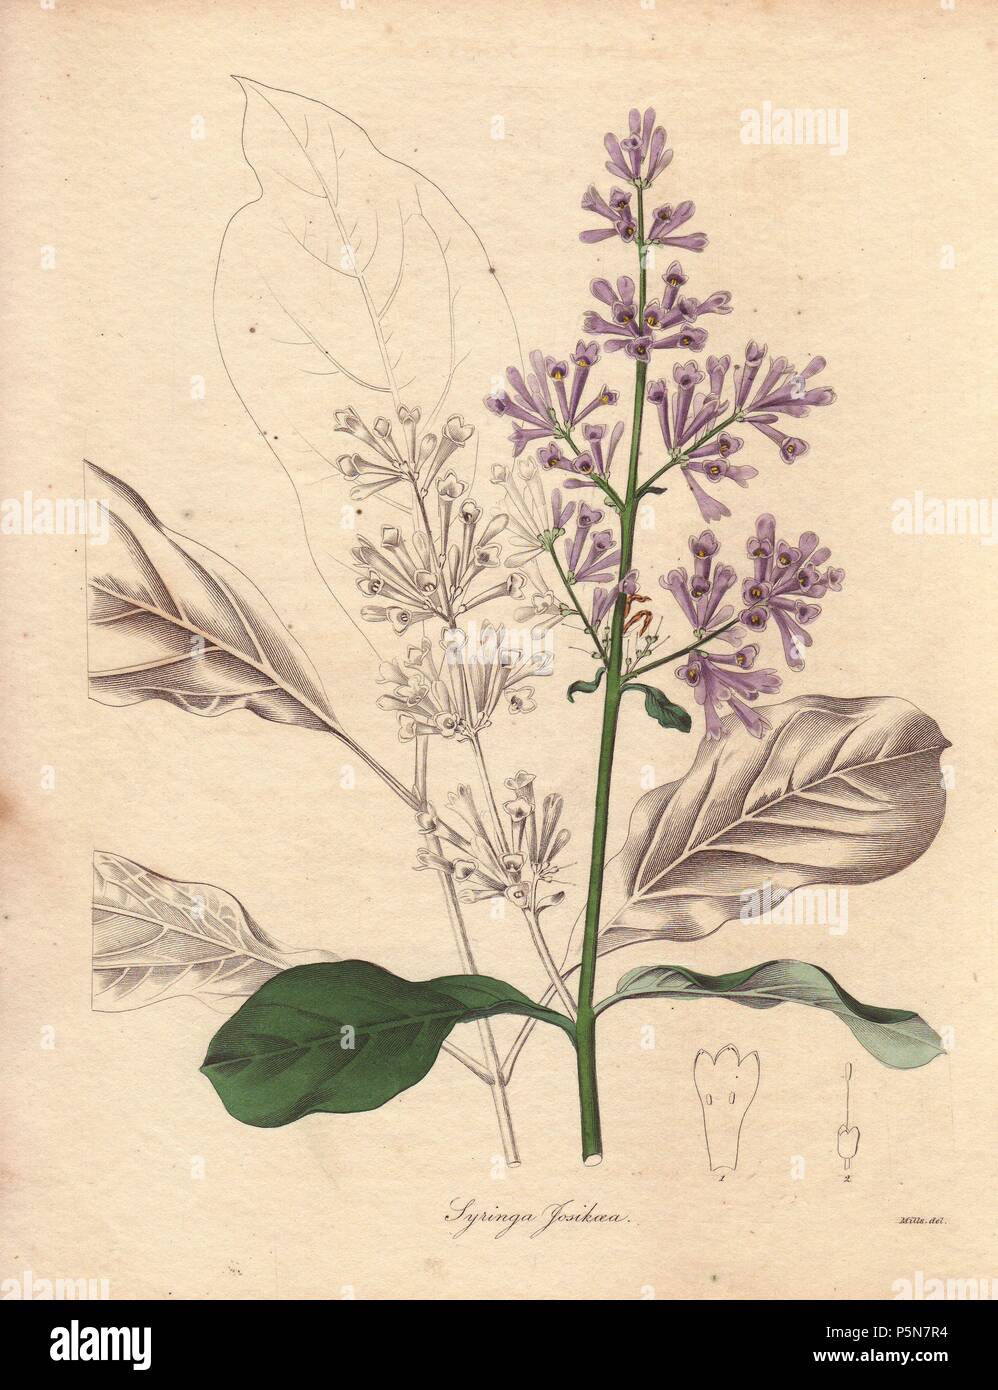 Syringa josikaea (Hungarian Lilac) is a species of lilac, native to central and eastern Europe. . Miss R. Mills (active 1836~1842) was also the main illustrator for Knowles and Westcott’s The Floral Cabinet (1837-1842). . Benjamin Maund's The Botanist was a five-volume series that introduced 250 new plants from 1836 to 1842. The series is notable for its many female artists: the plates were drawn by Maund's daughters Sarah and Eliza, Augusta Withers, Priscilla Bury, Jane Taylor, Miss R. Mills among others. The other characteristic is partial colouring - many of the finely detailed copperplate  Stock Photo